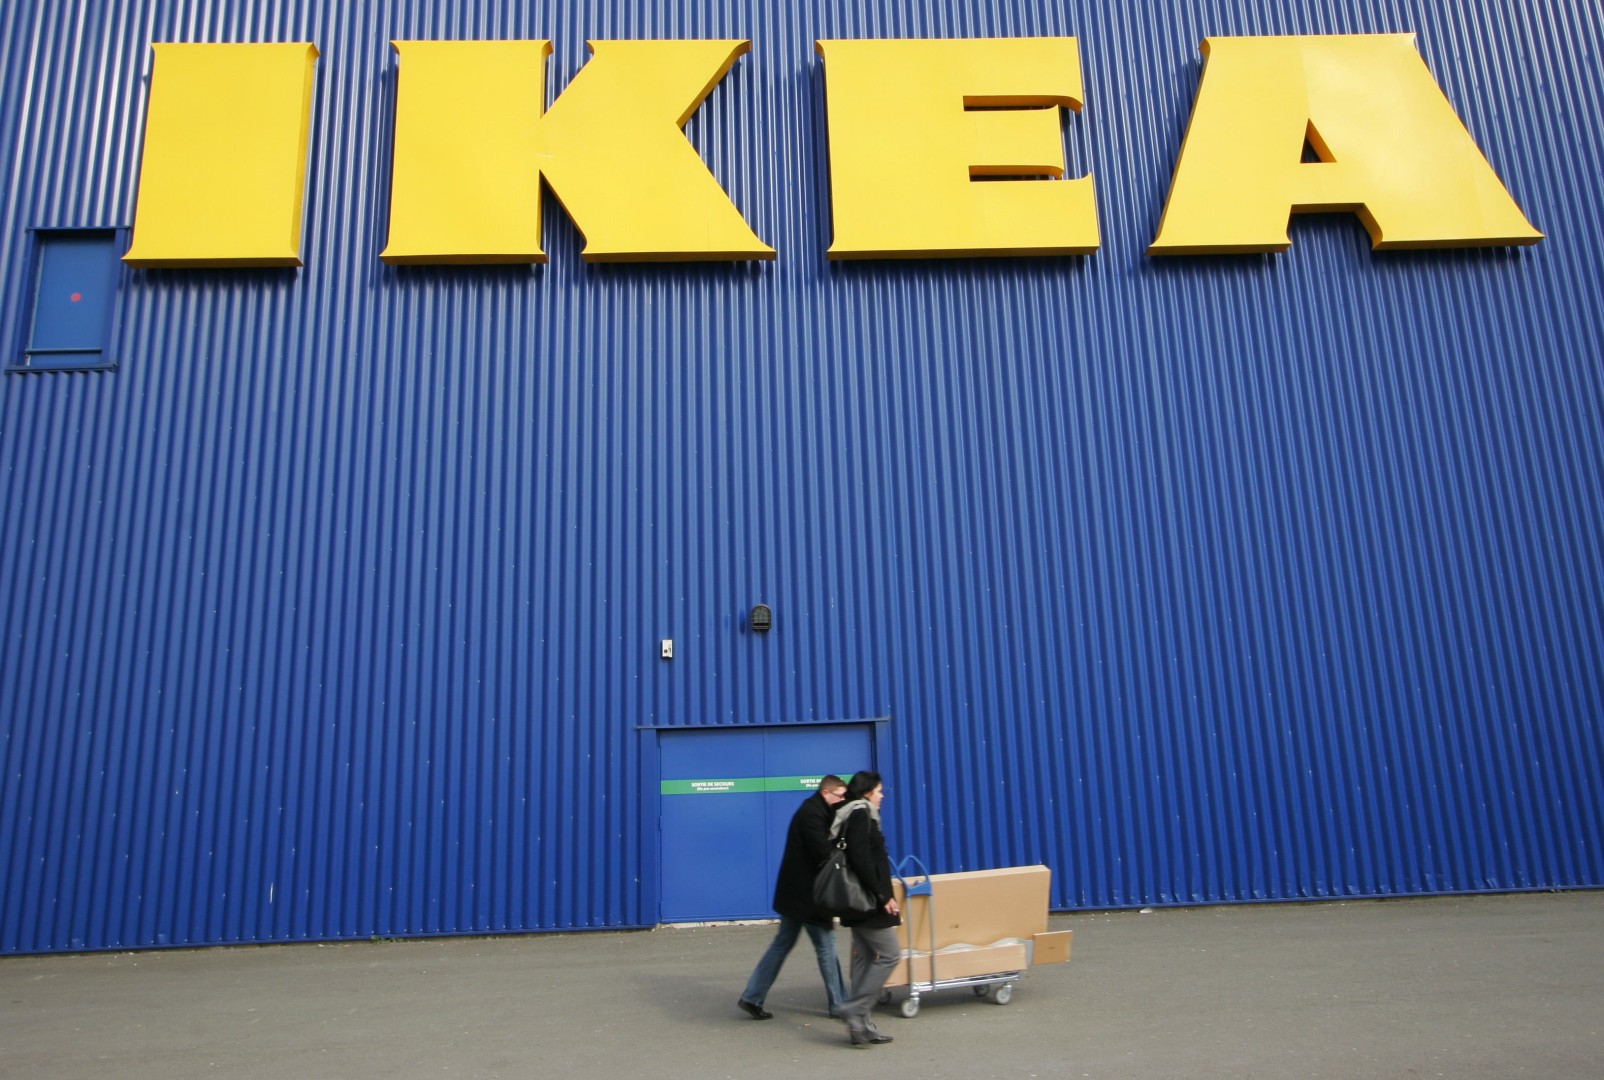 Smederij meer Autorisatie Ikea forced to recall 'Sea of Japan' poster worldwide after Korean backlash  | South China Morning Post